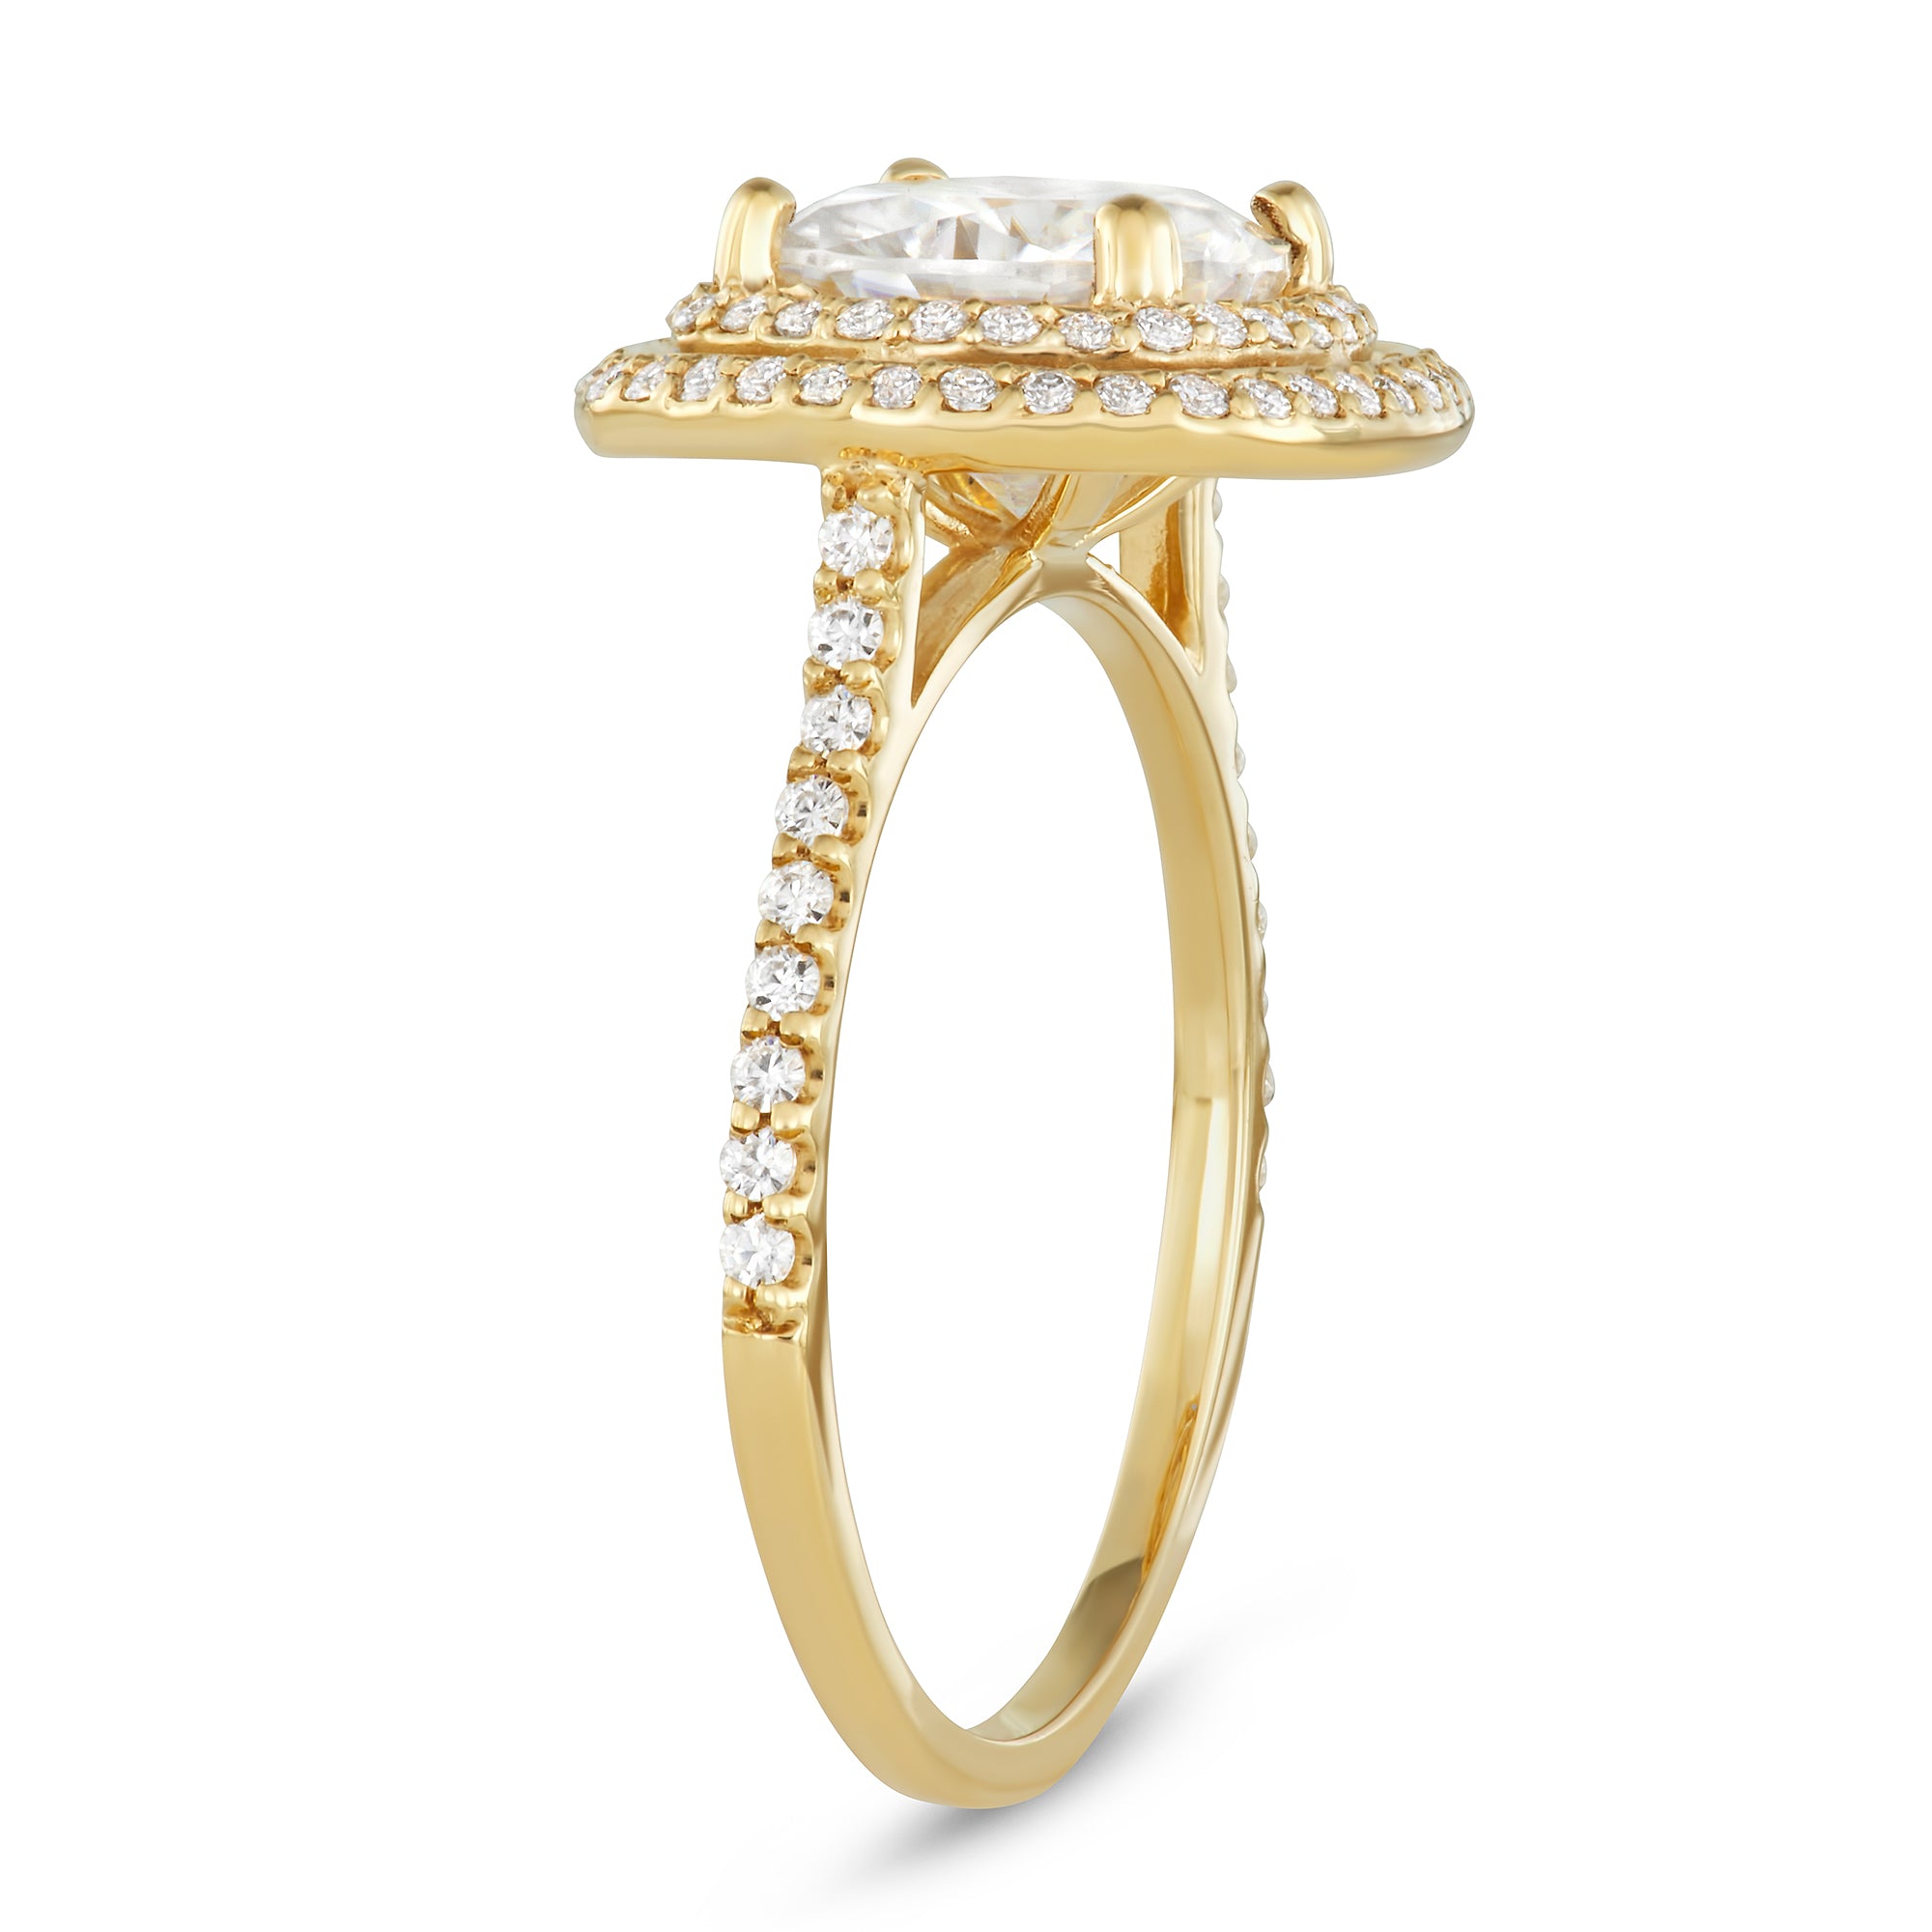 2.90 CTW DEW Cushion Moissanite Halo Ring in 14K Yellow Gold